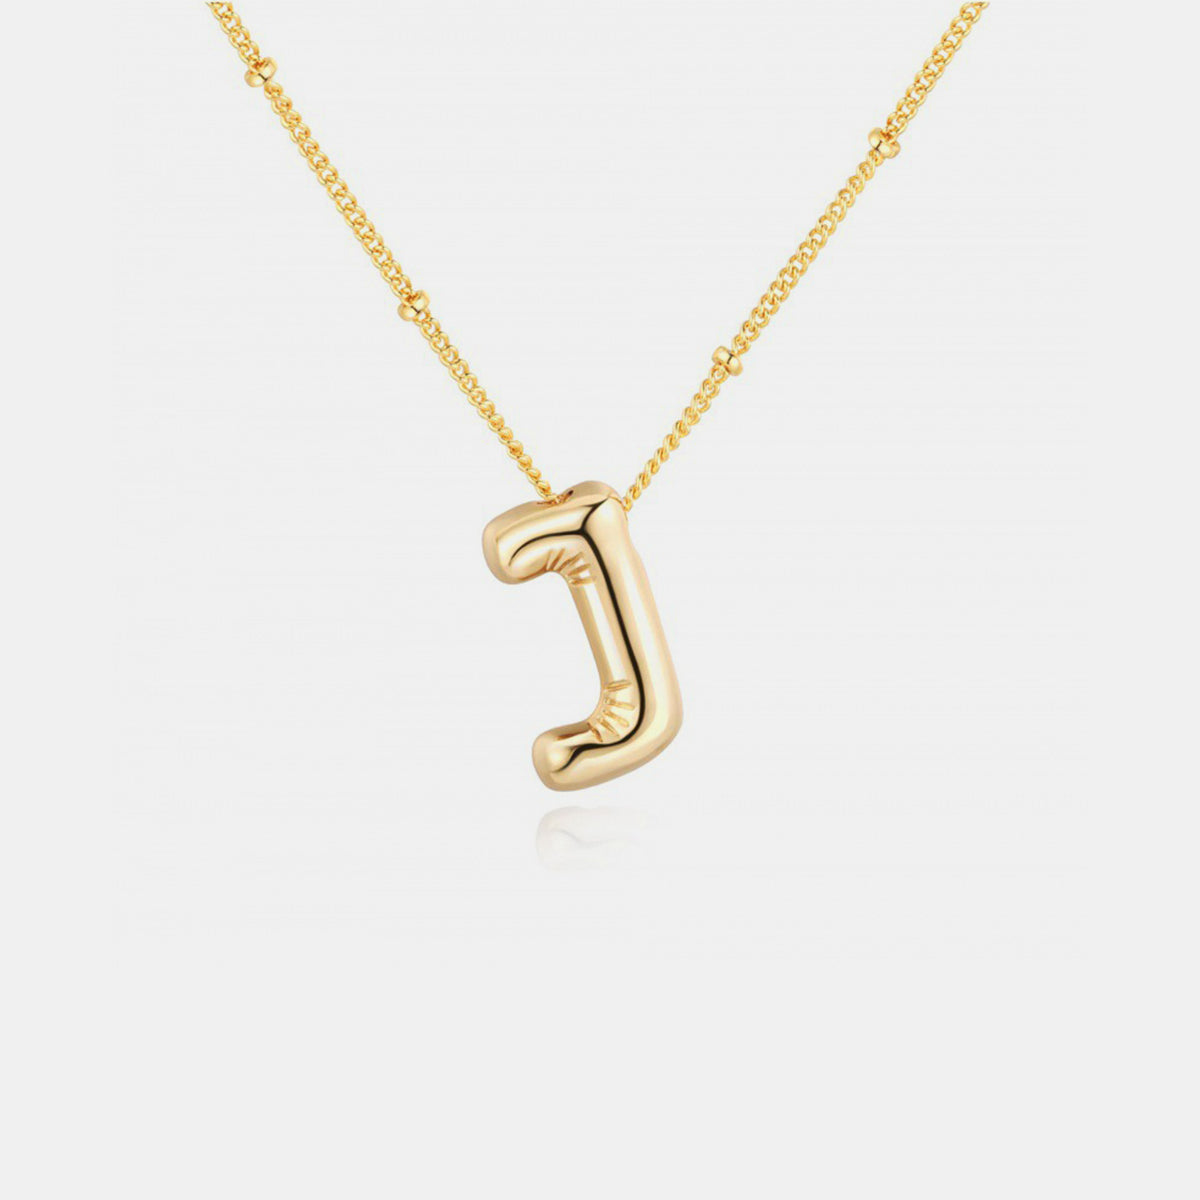 TEEK - A-J Gold-Plated Letter Necklace JEWELRY TEEK Trend Style J  